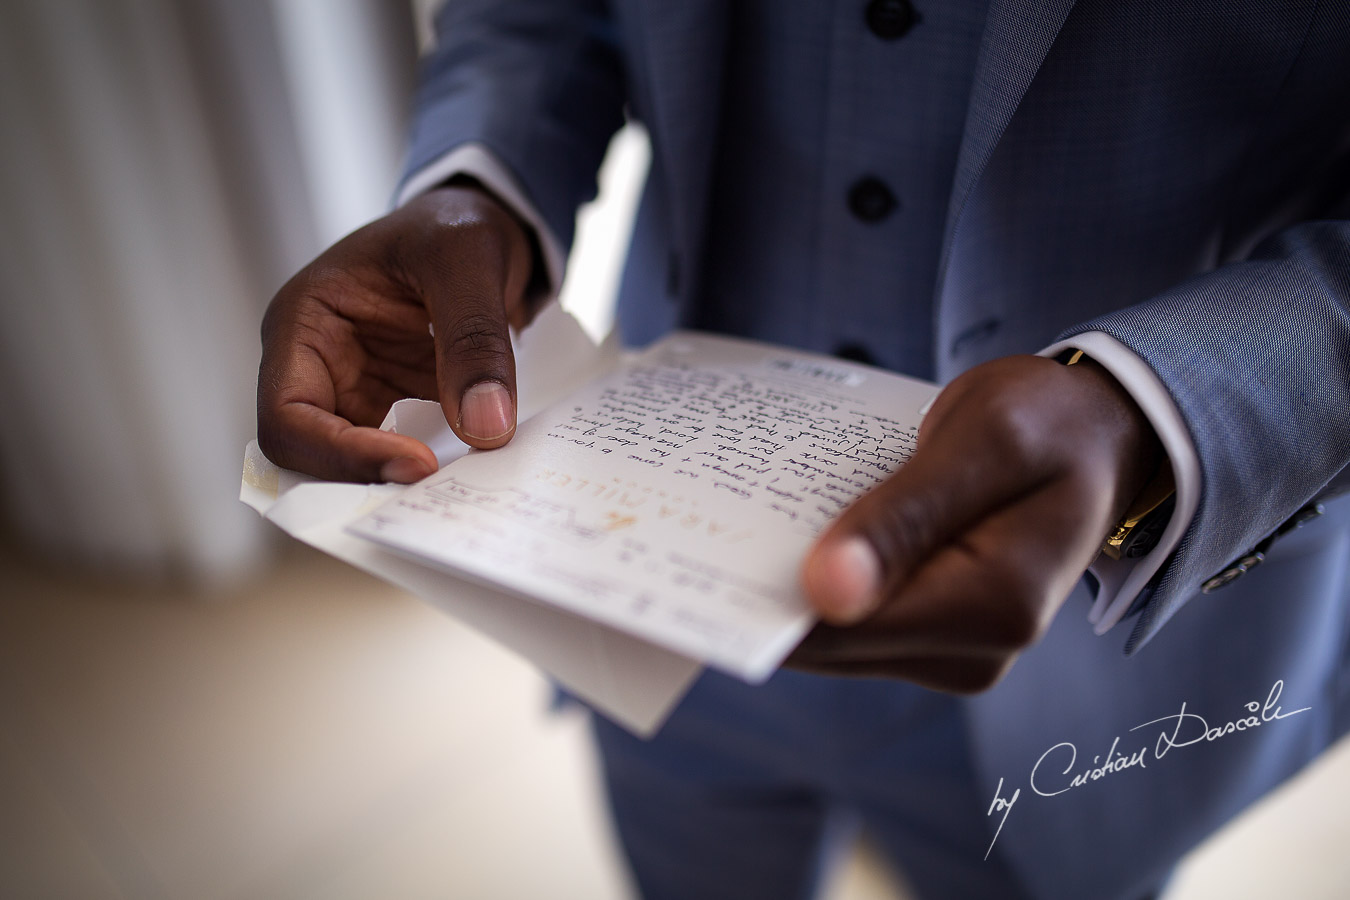 Letter from bride to the groom phootgraphed at a wedding at Minthis Hills in Cyprus, by Cristian Dascalu.